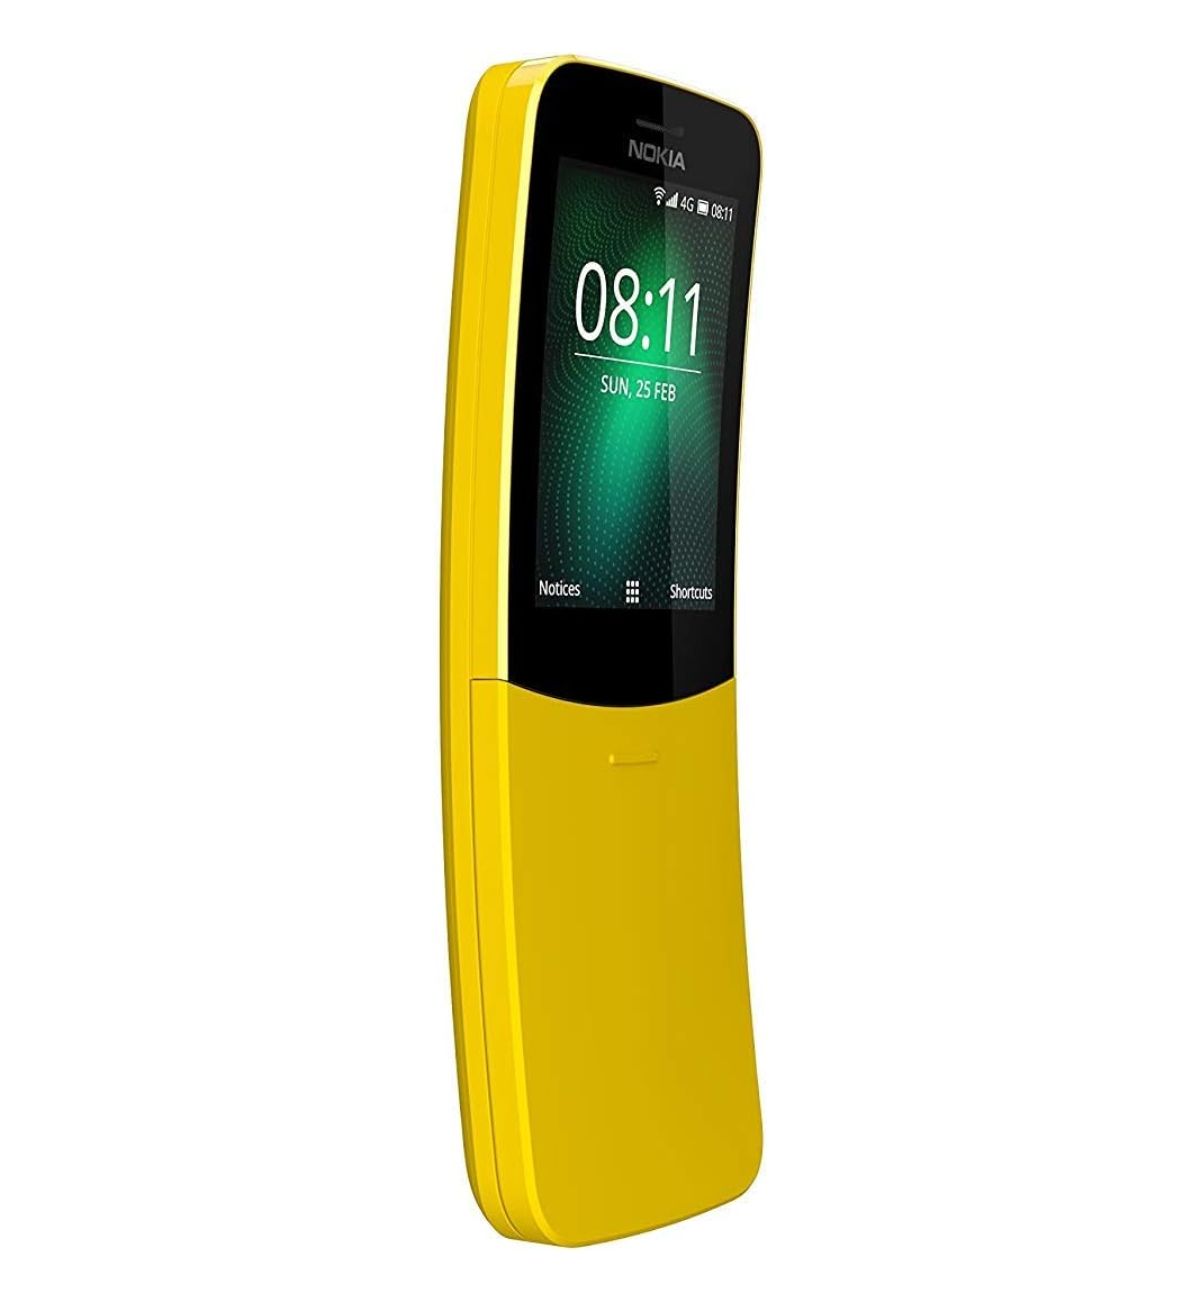 A close-up of the iconic curved screen of the Nokia 8110 4G phone.